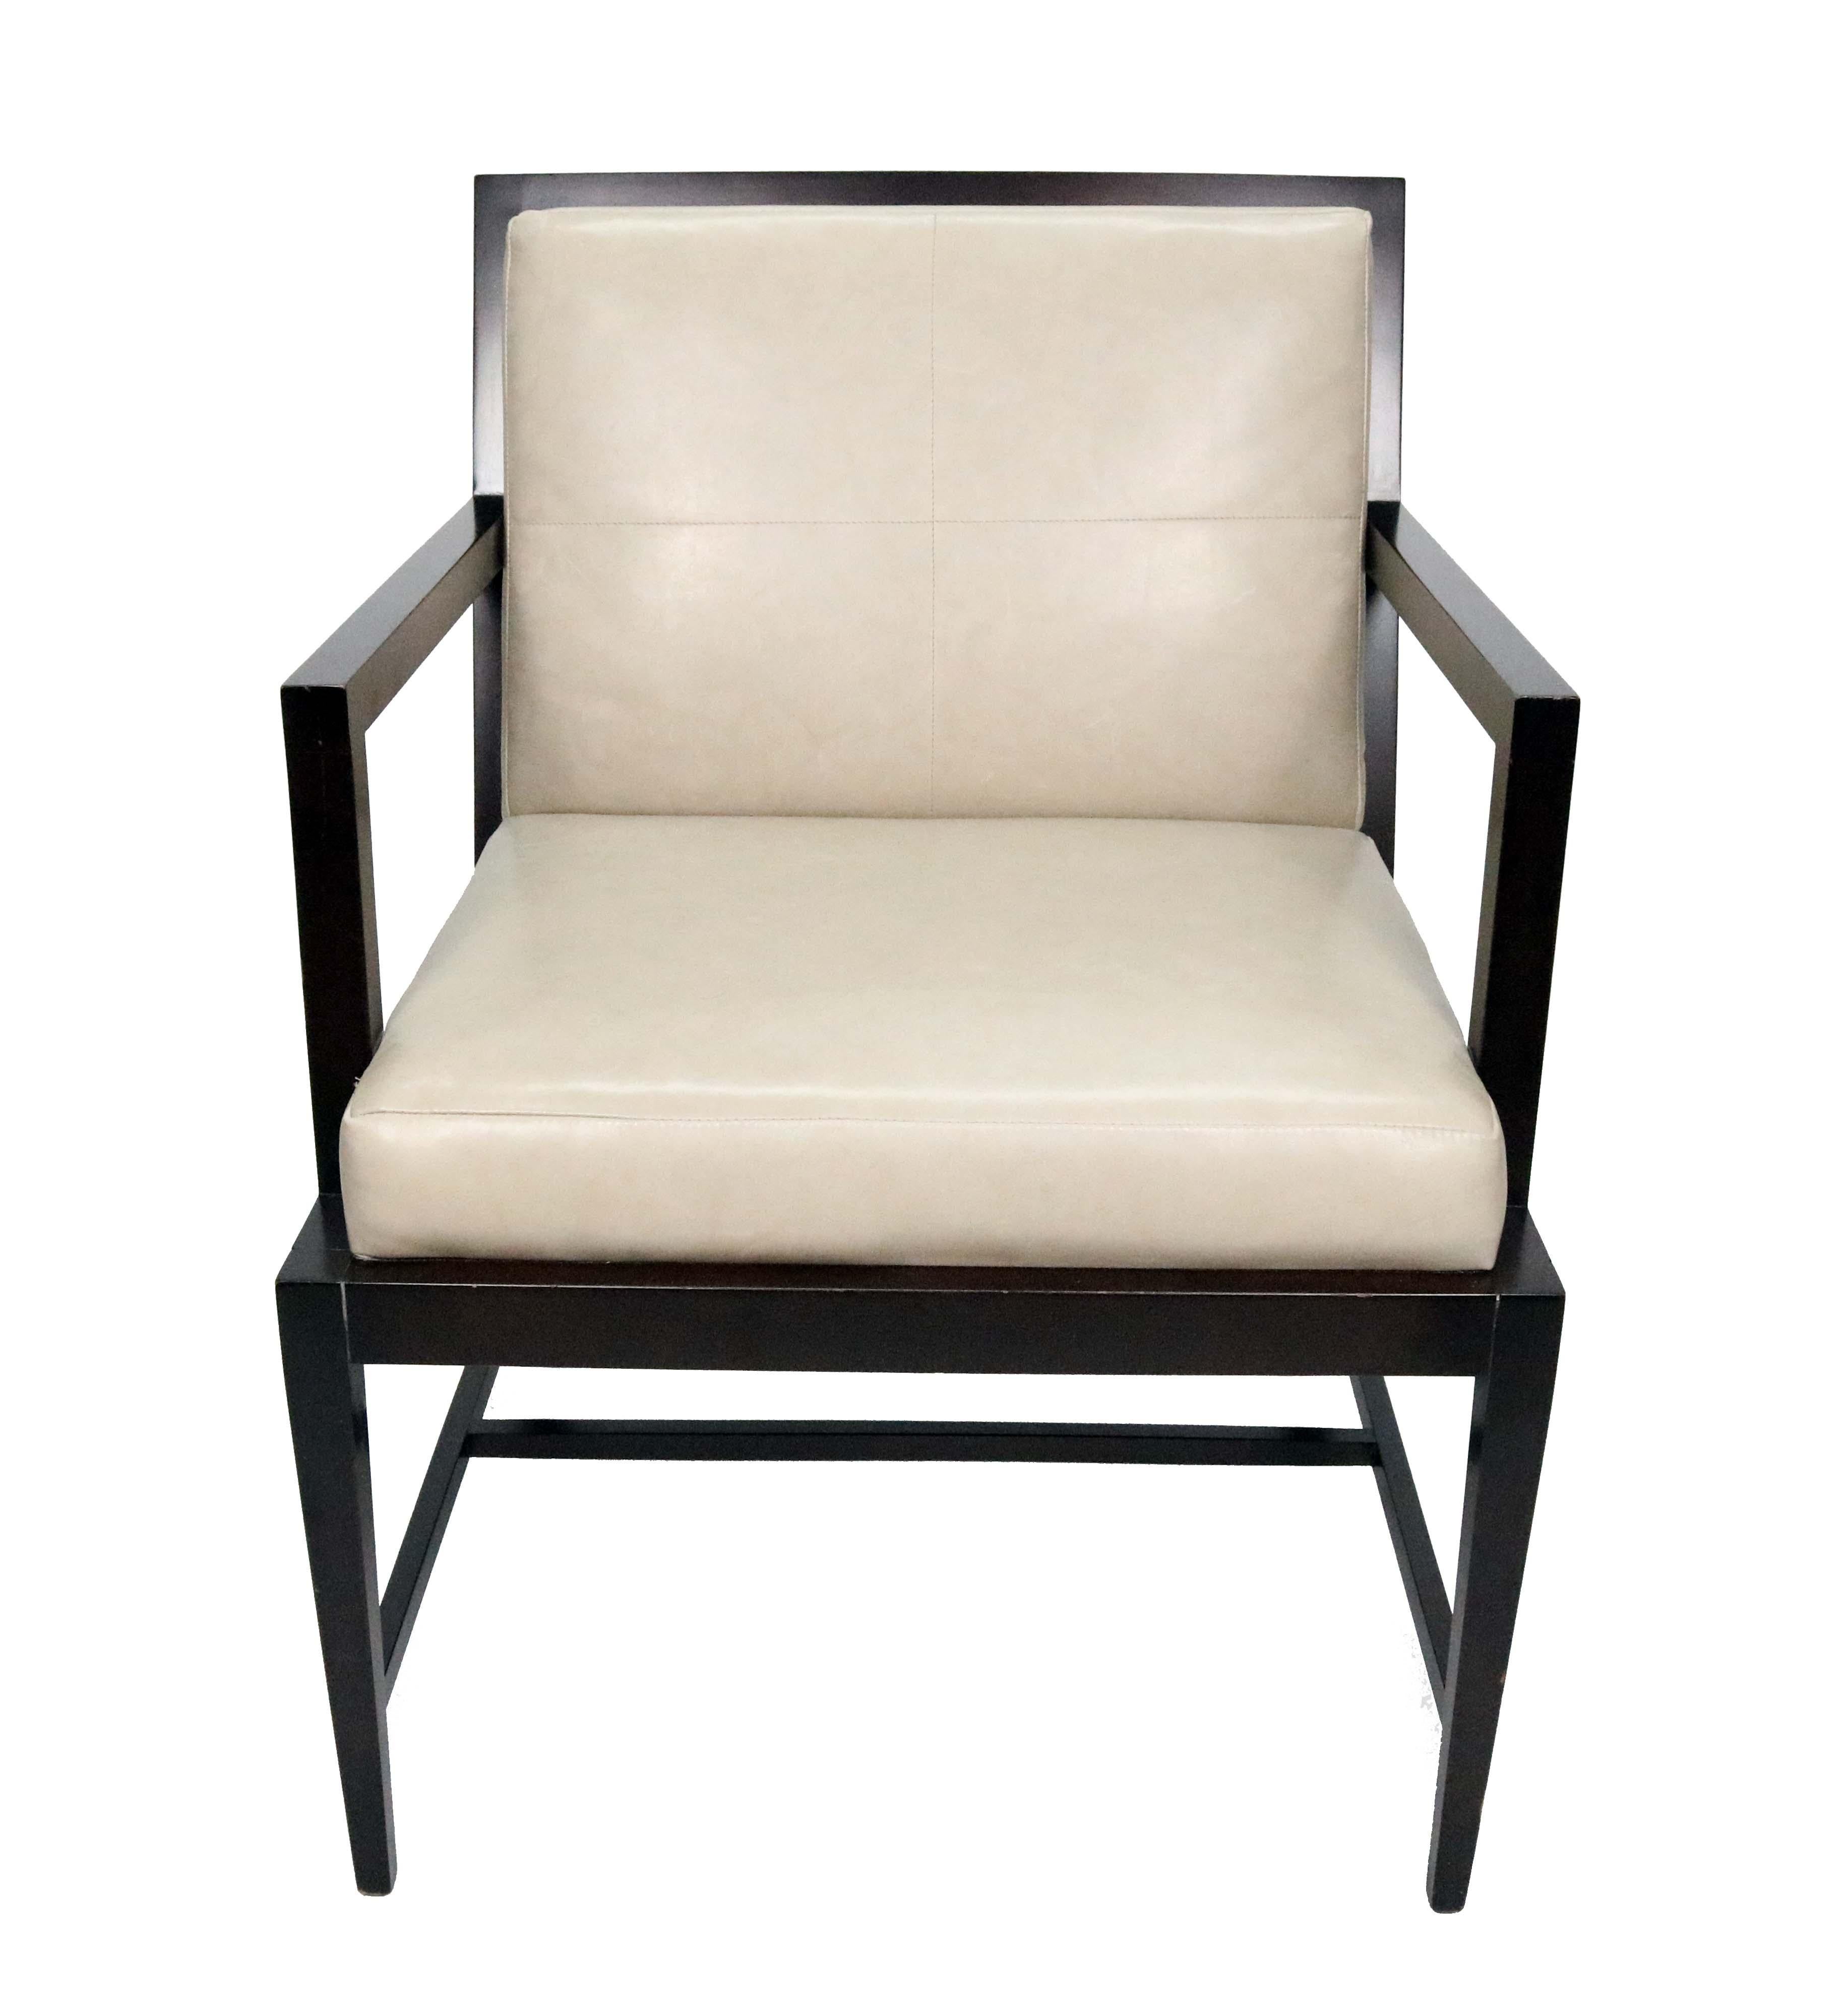 A stately 'Vanderbilt' accent chair in camel leather by Barbara Barry for HBF.